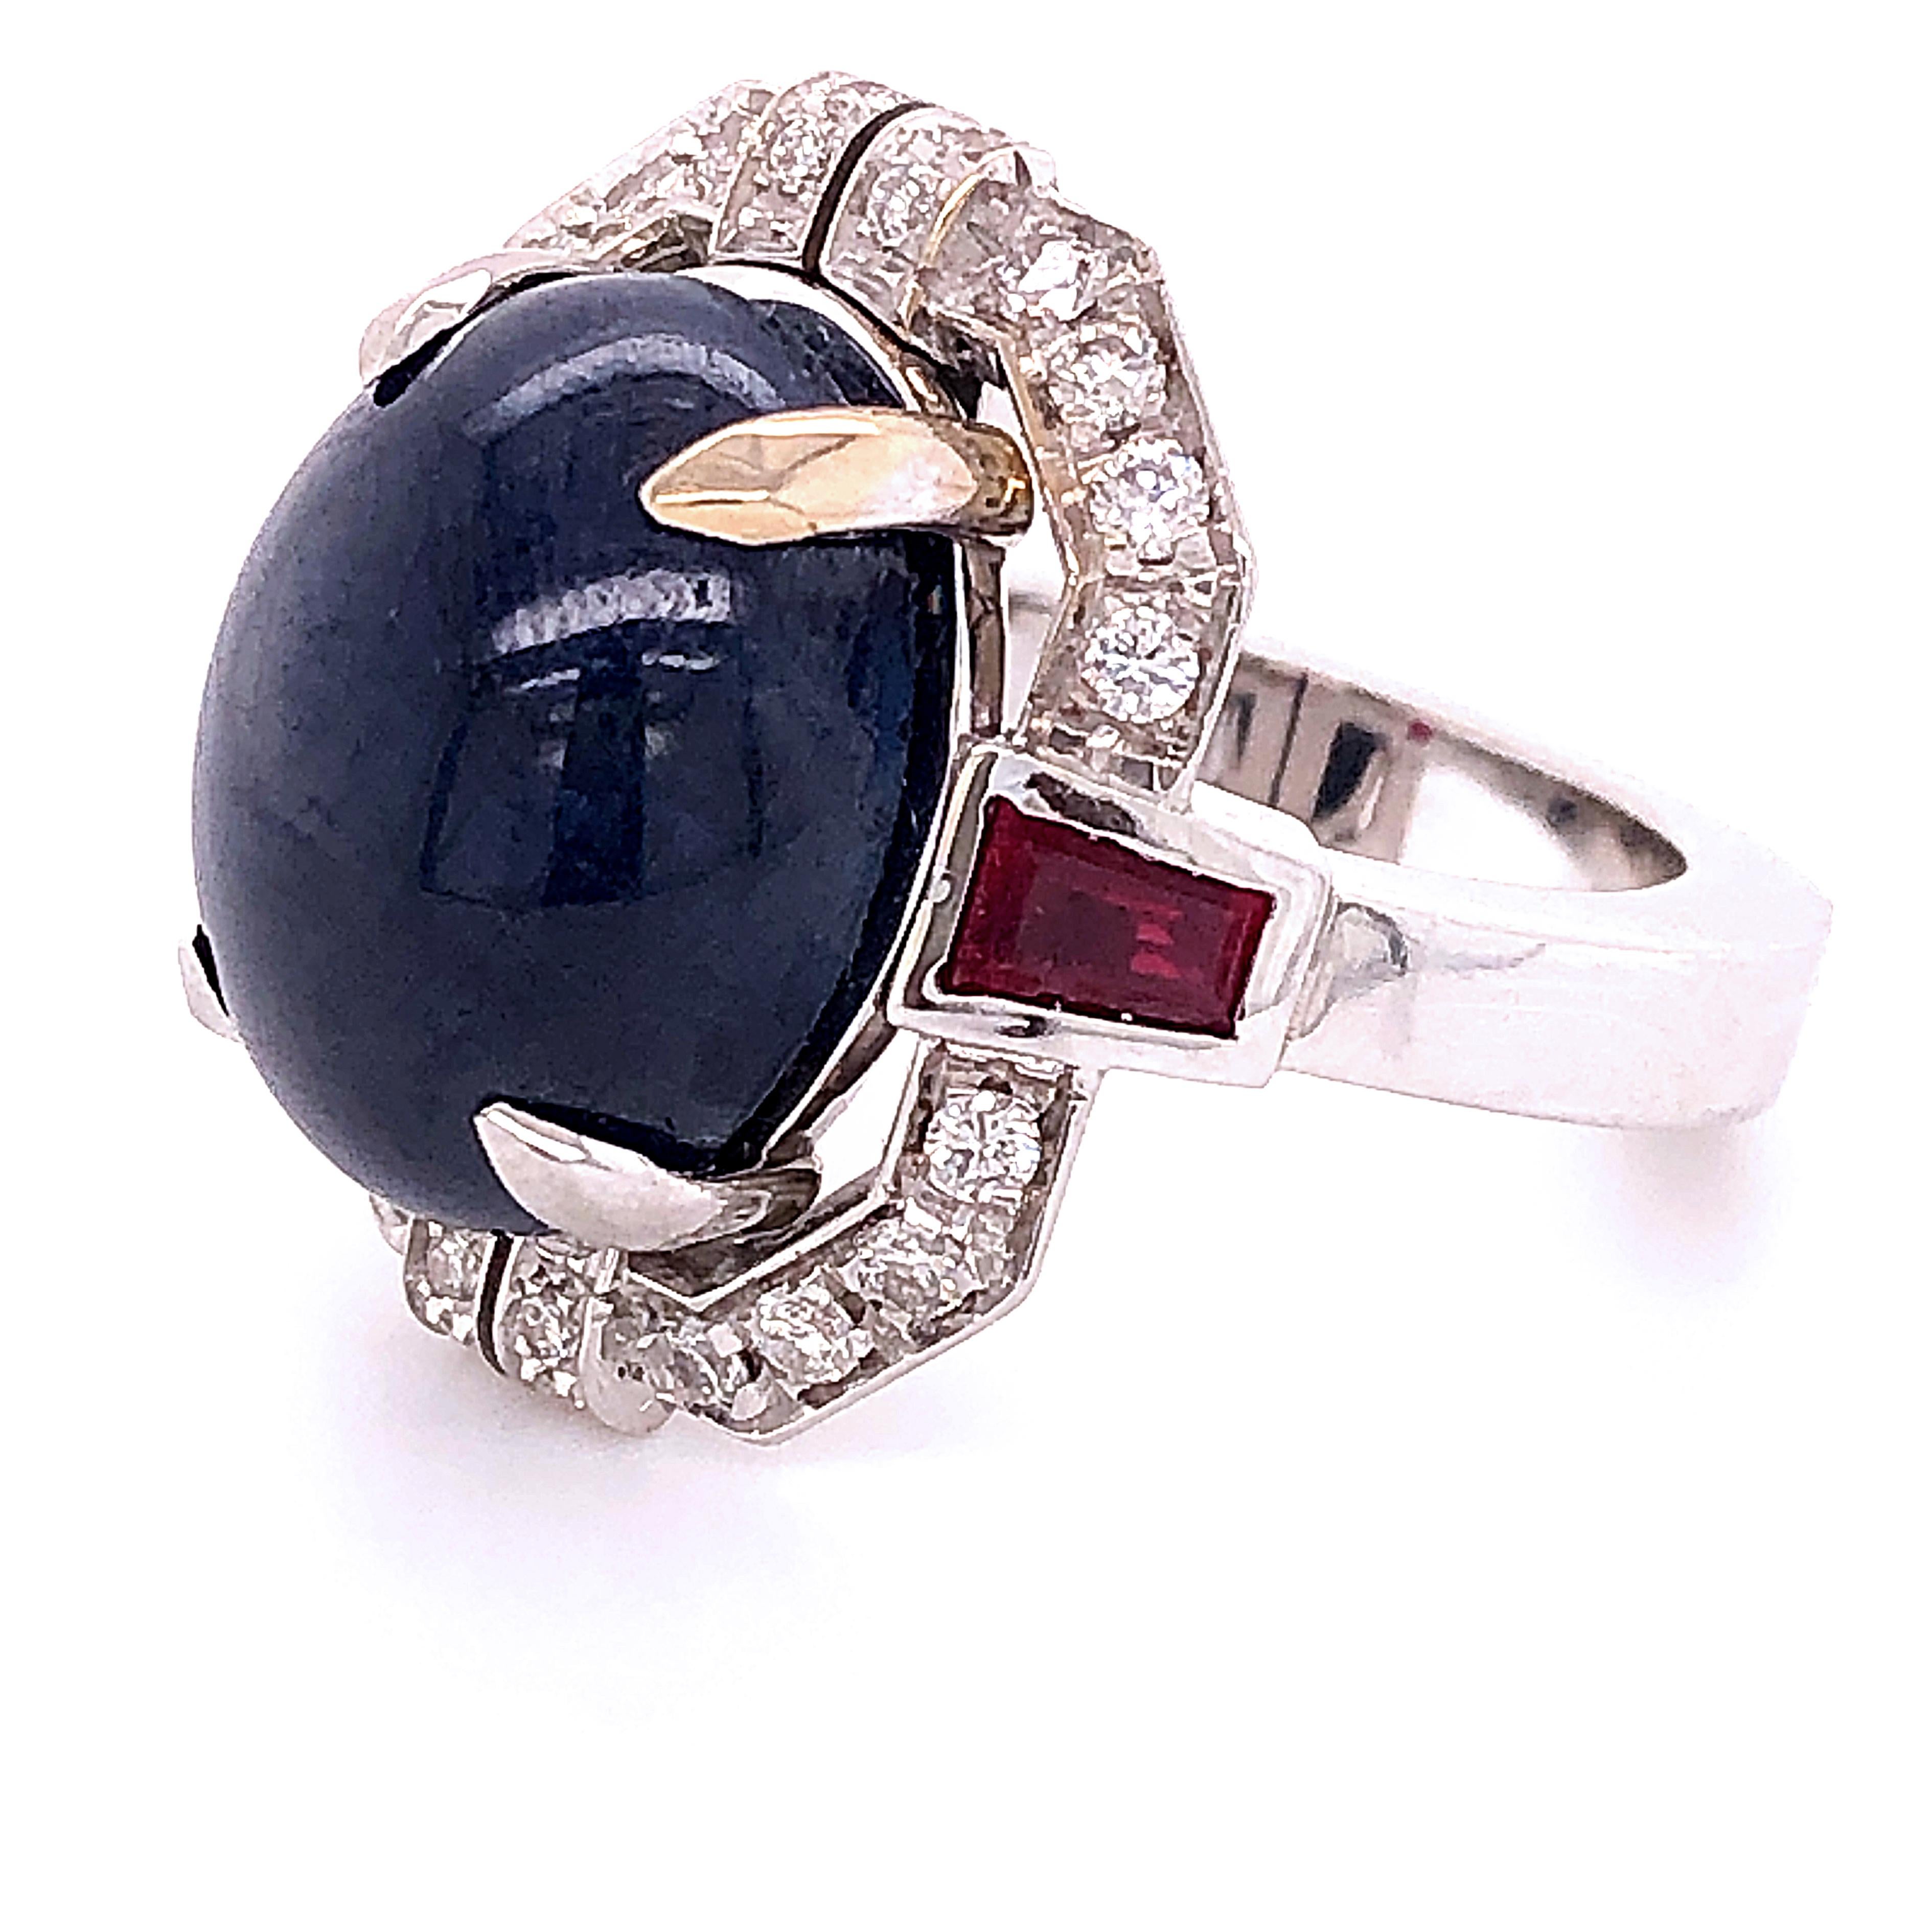 One-of-a-kind, Unique yet Timeless Cocktail Ring featuring a 13.48 Carat Natural Oval Sapphire Cabochon, two 0.66 Kt Carat Ruby Tapered Baguette in a chic 0.42 Kt White Diamond 18K White Gold Setting.
A detailed Gemological Certificate will be